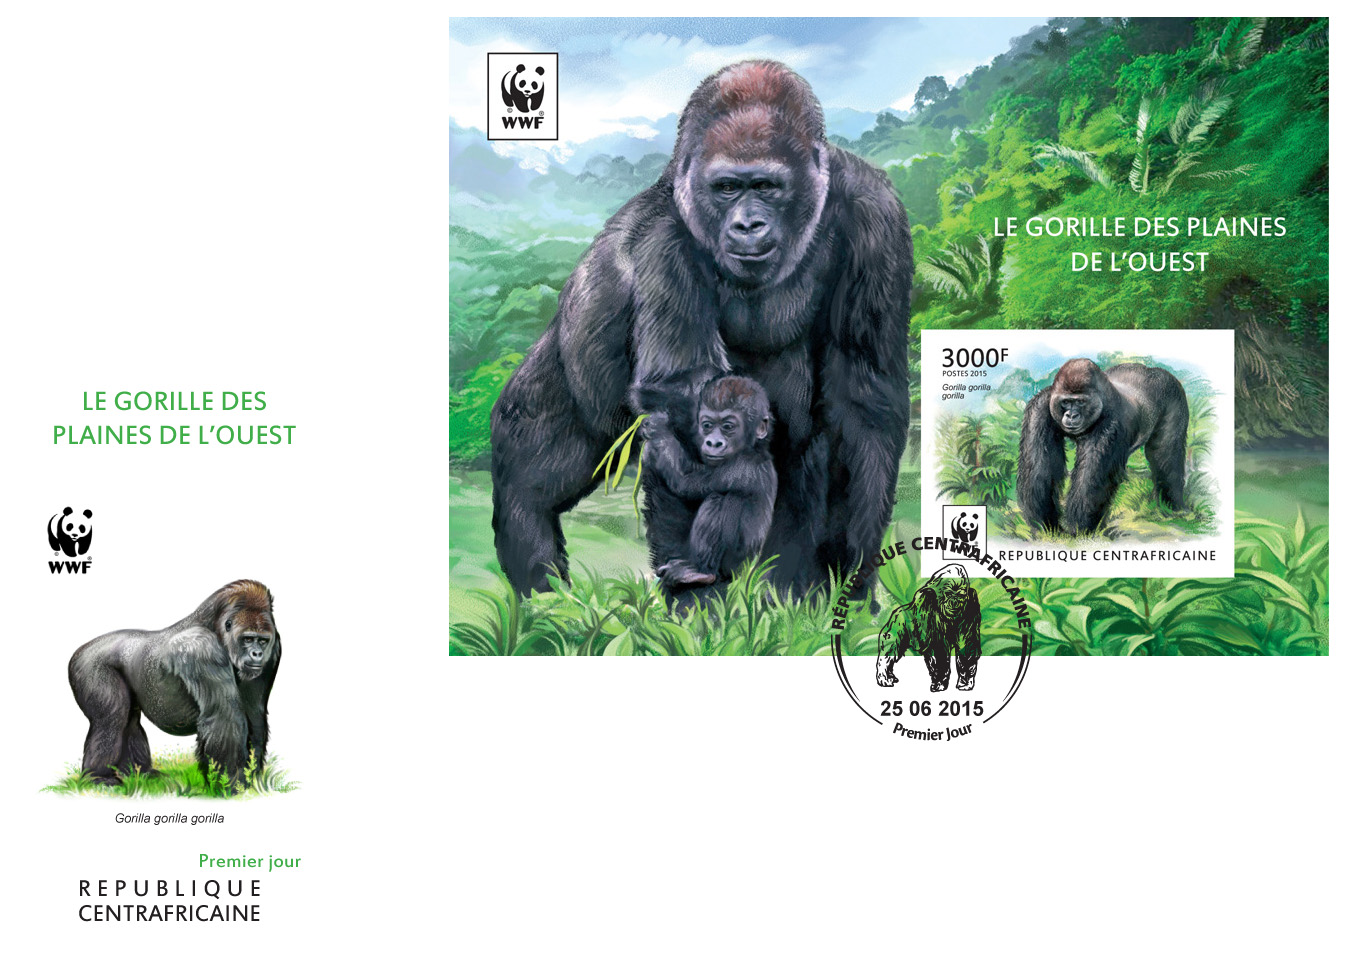 WWF – Gorilla (FDC imperf.) - Issue of Central African republic postage stamps